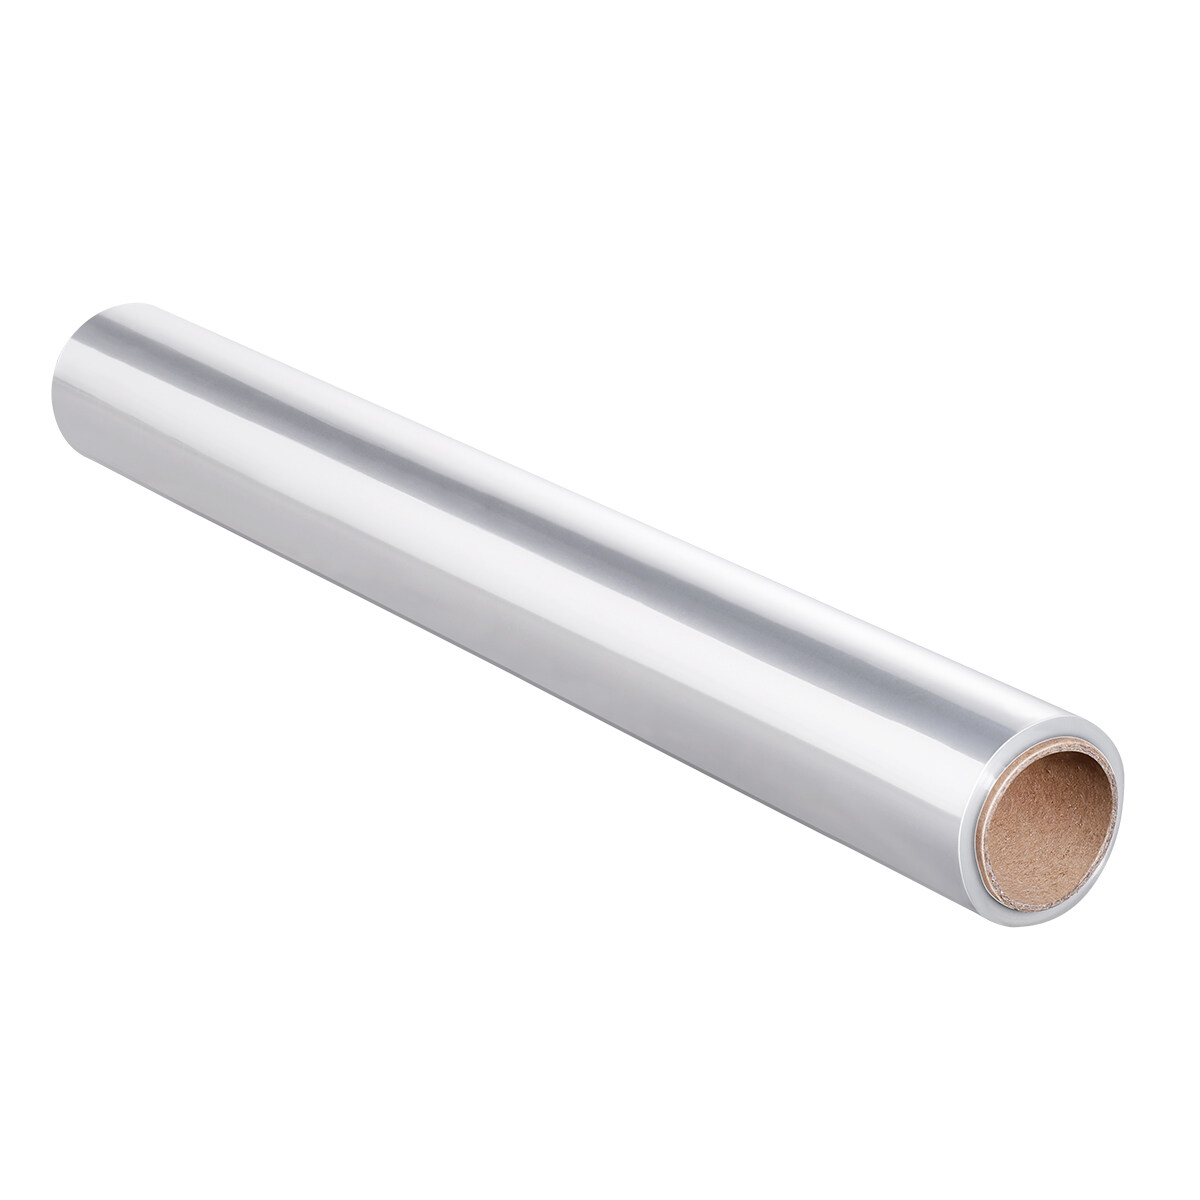 STOBOK Clear Cellophane Wrap Roll for Craft Baskets Gifts Flowers Presents Wrapping 31.5 in x 100 ft 